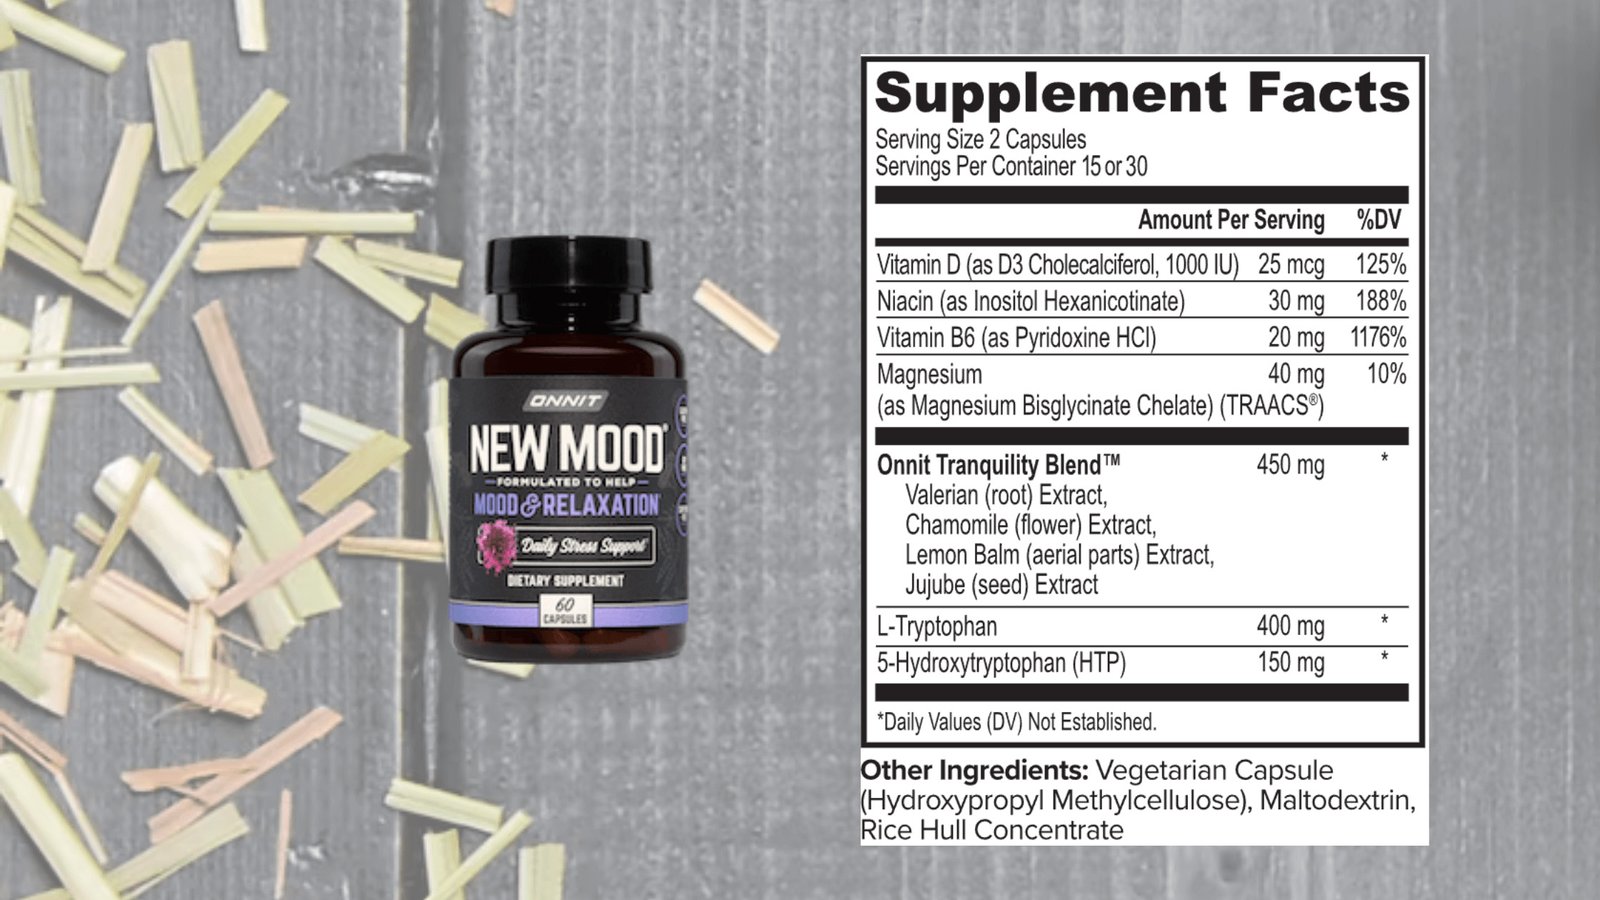 Onnit New Mood Dosage